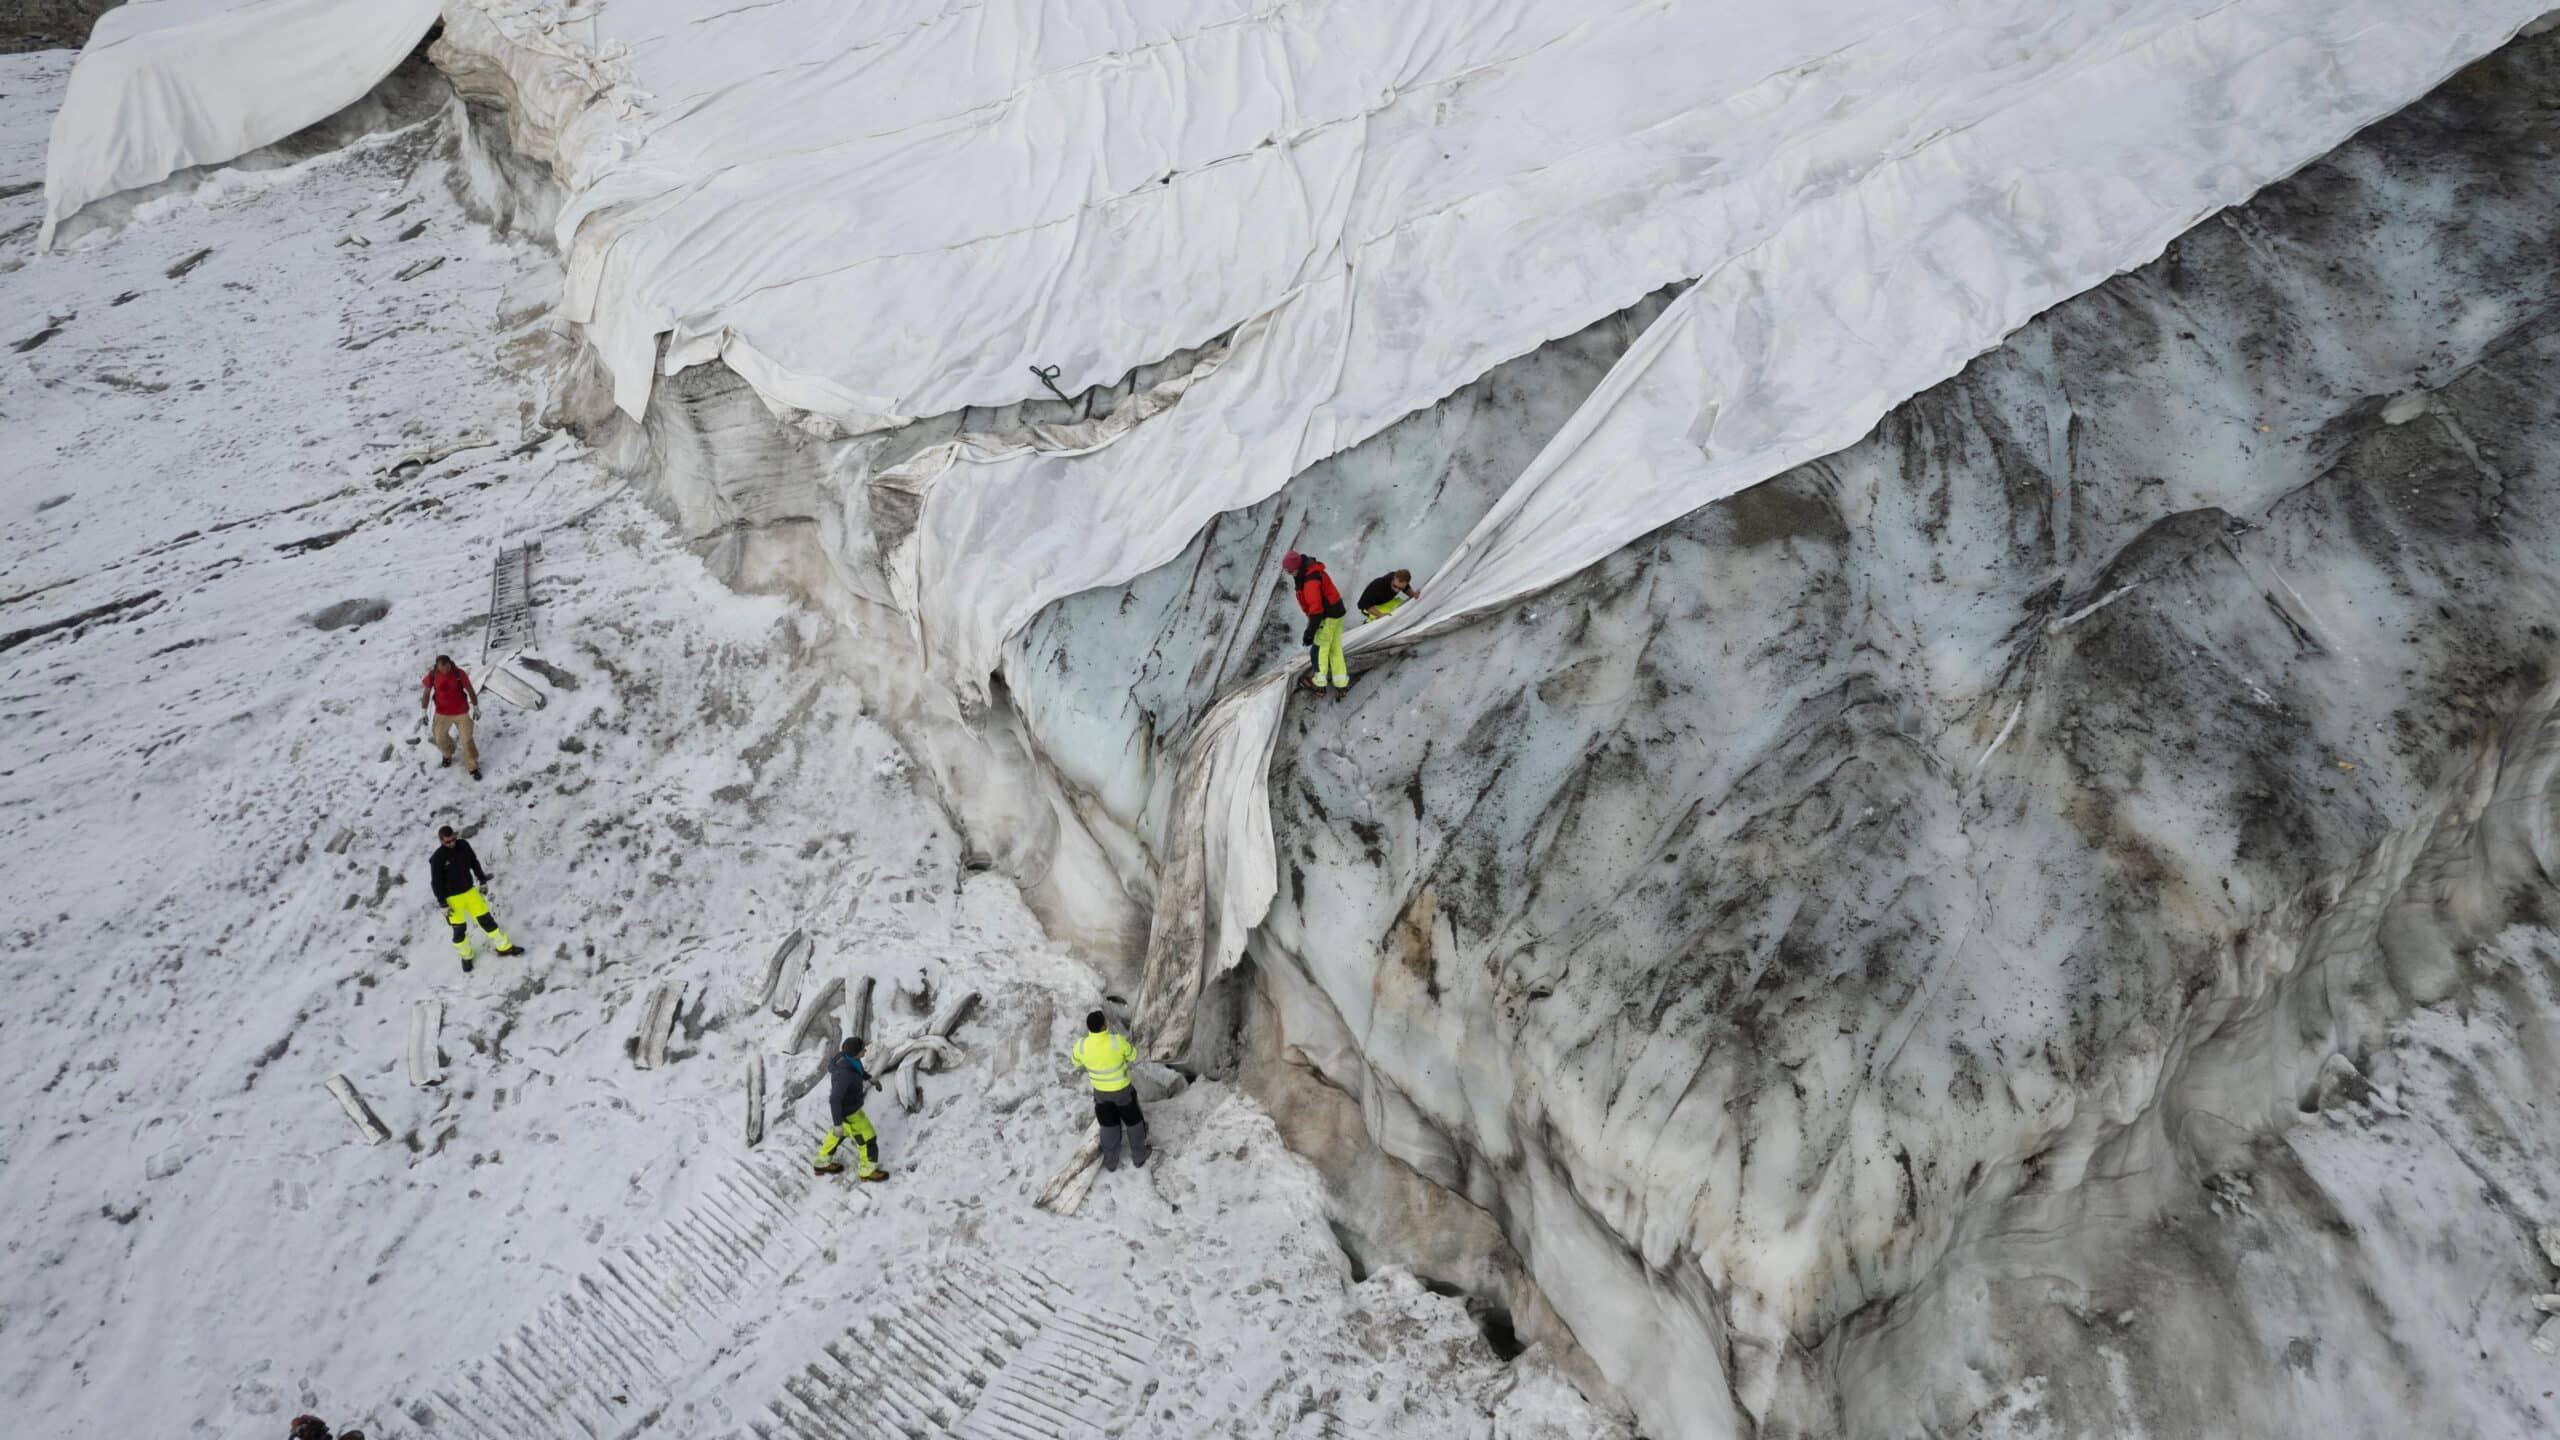 People work on a tarpaulin which cover the ice of the Corvatsch glacier.